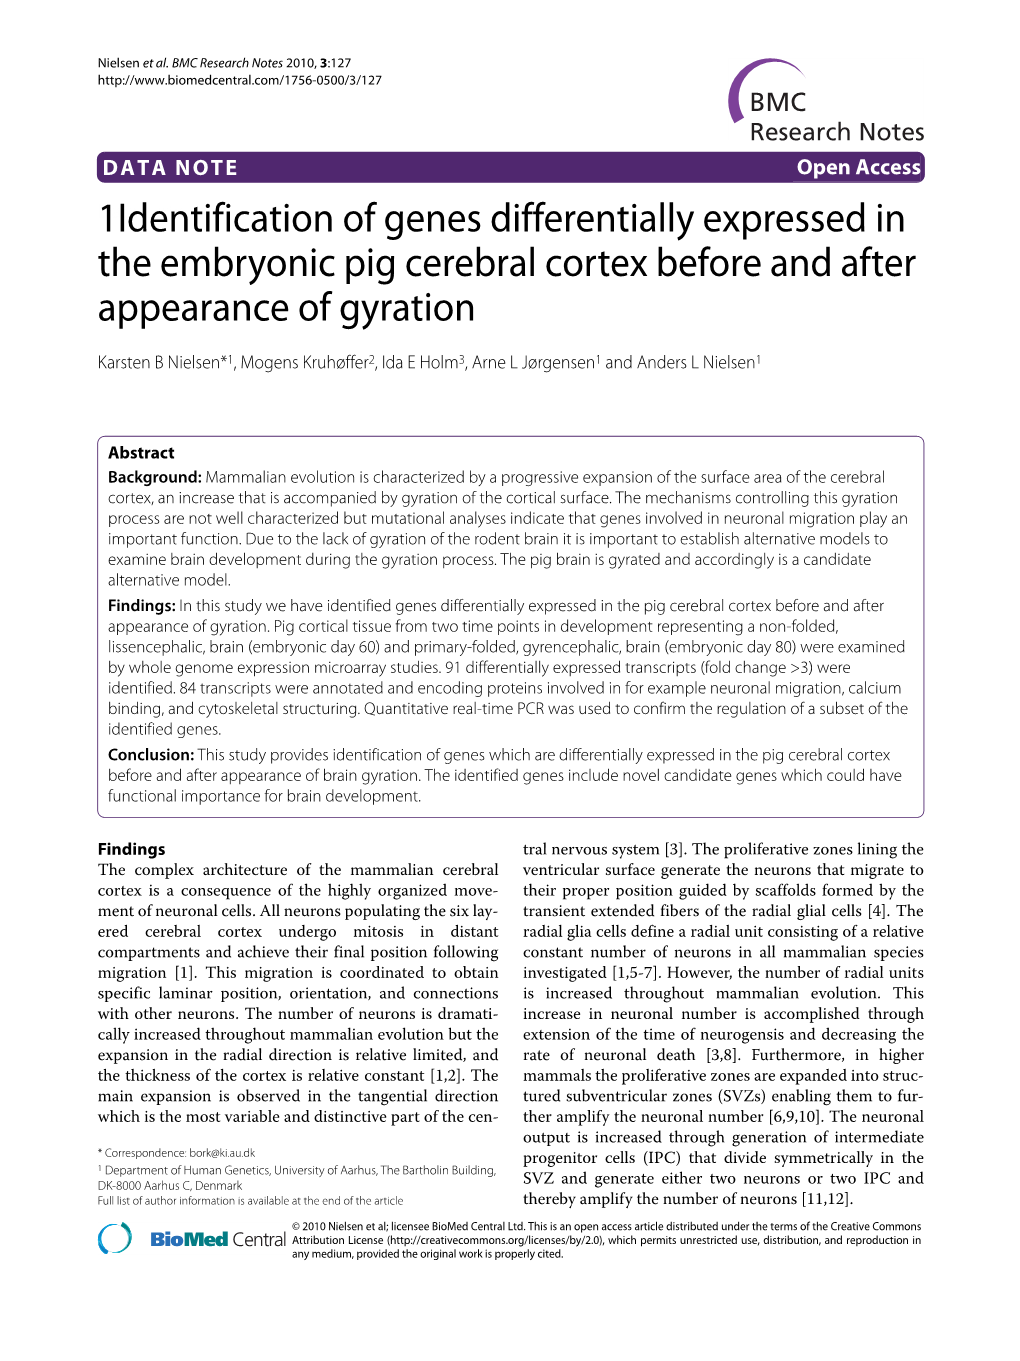 1Identification of Genes Differentially Expressed in the Embryonic Pig Cerebral Cortex Before and After Appearance of Gyration BMC Research Notes 2010, 3:127